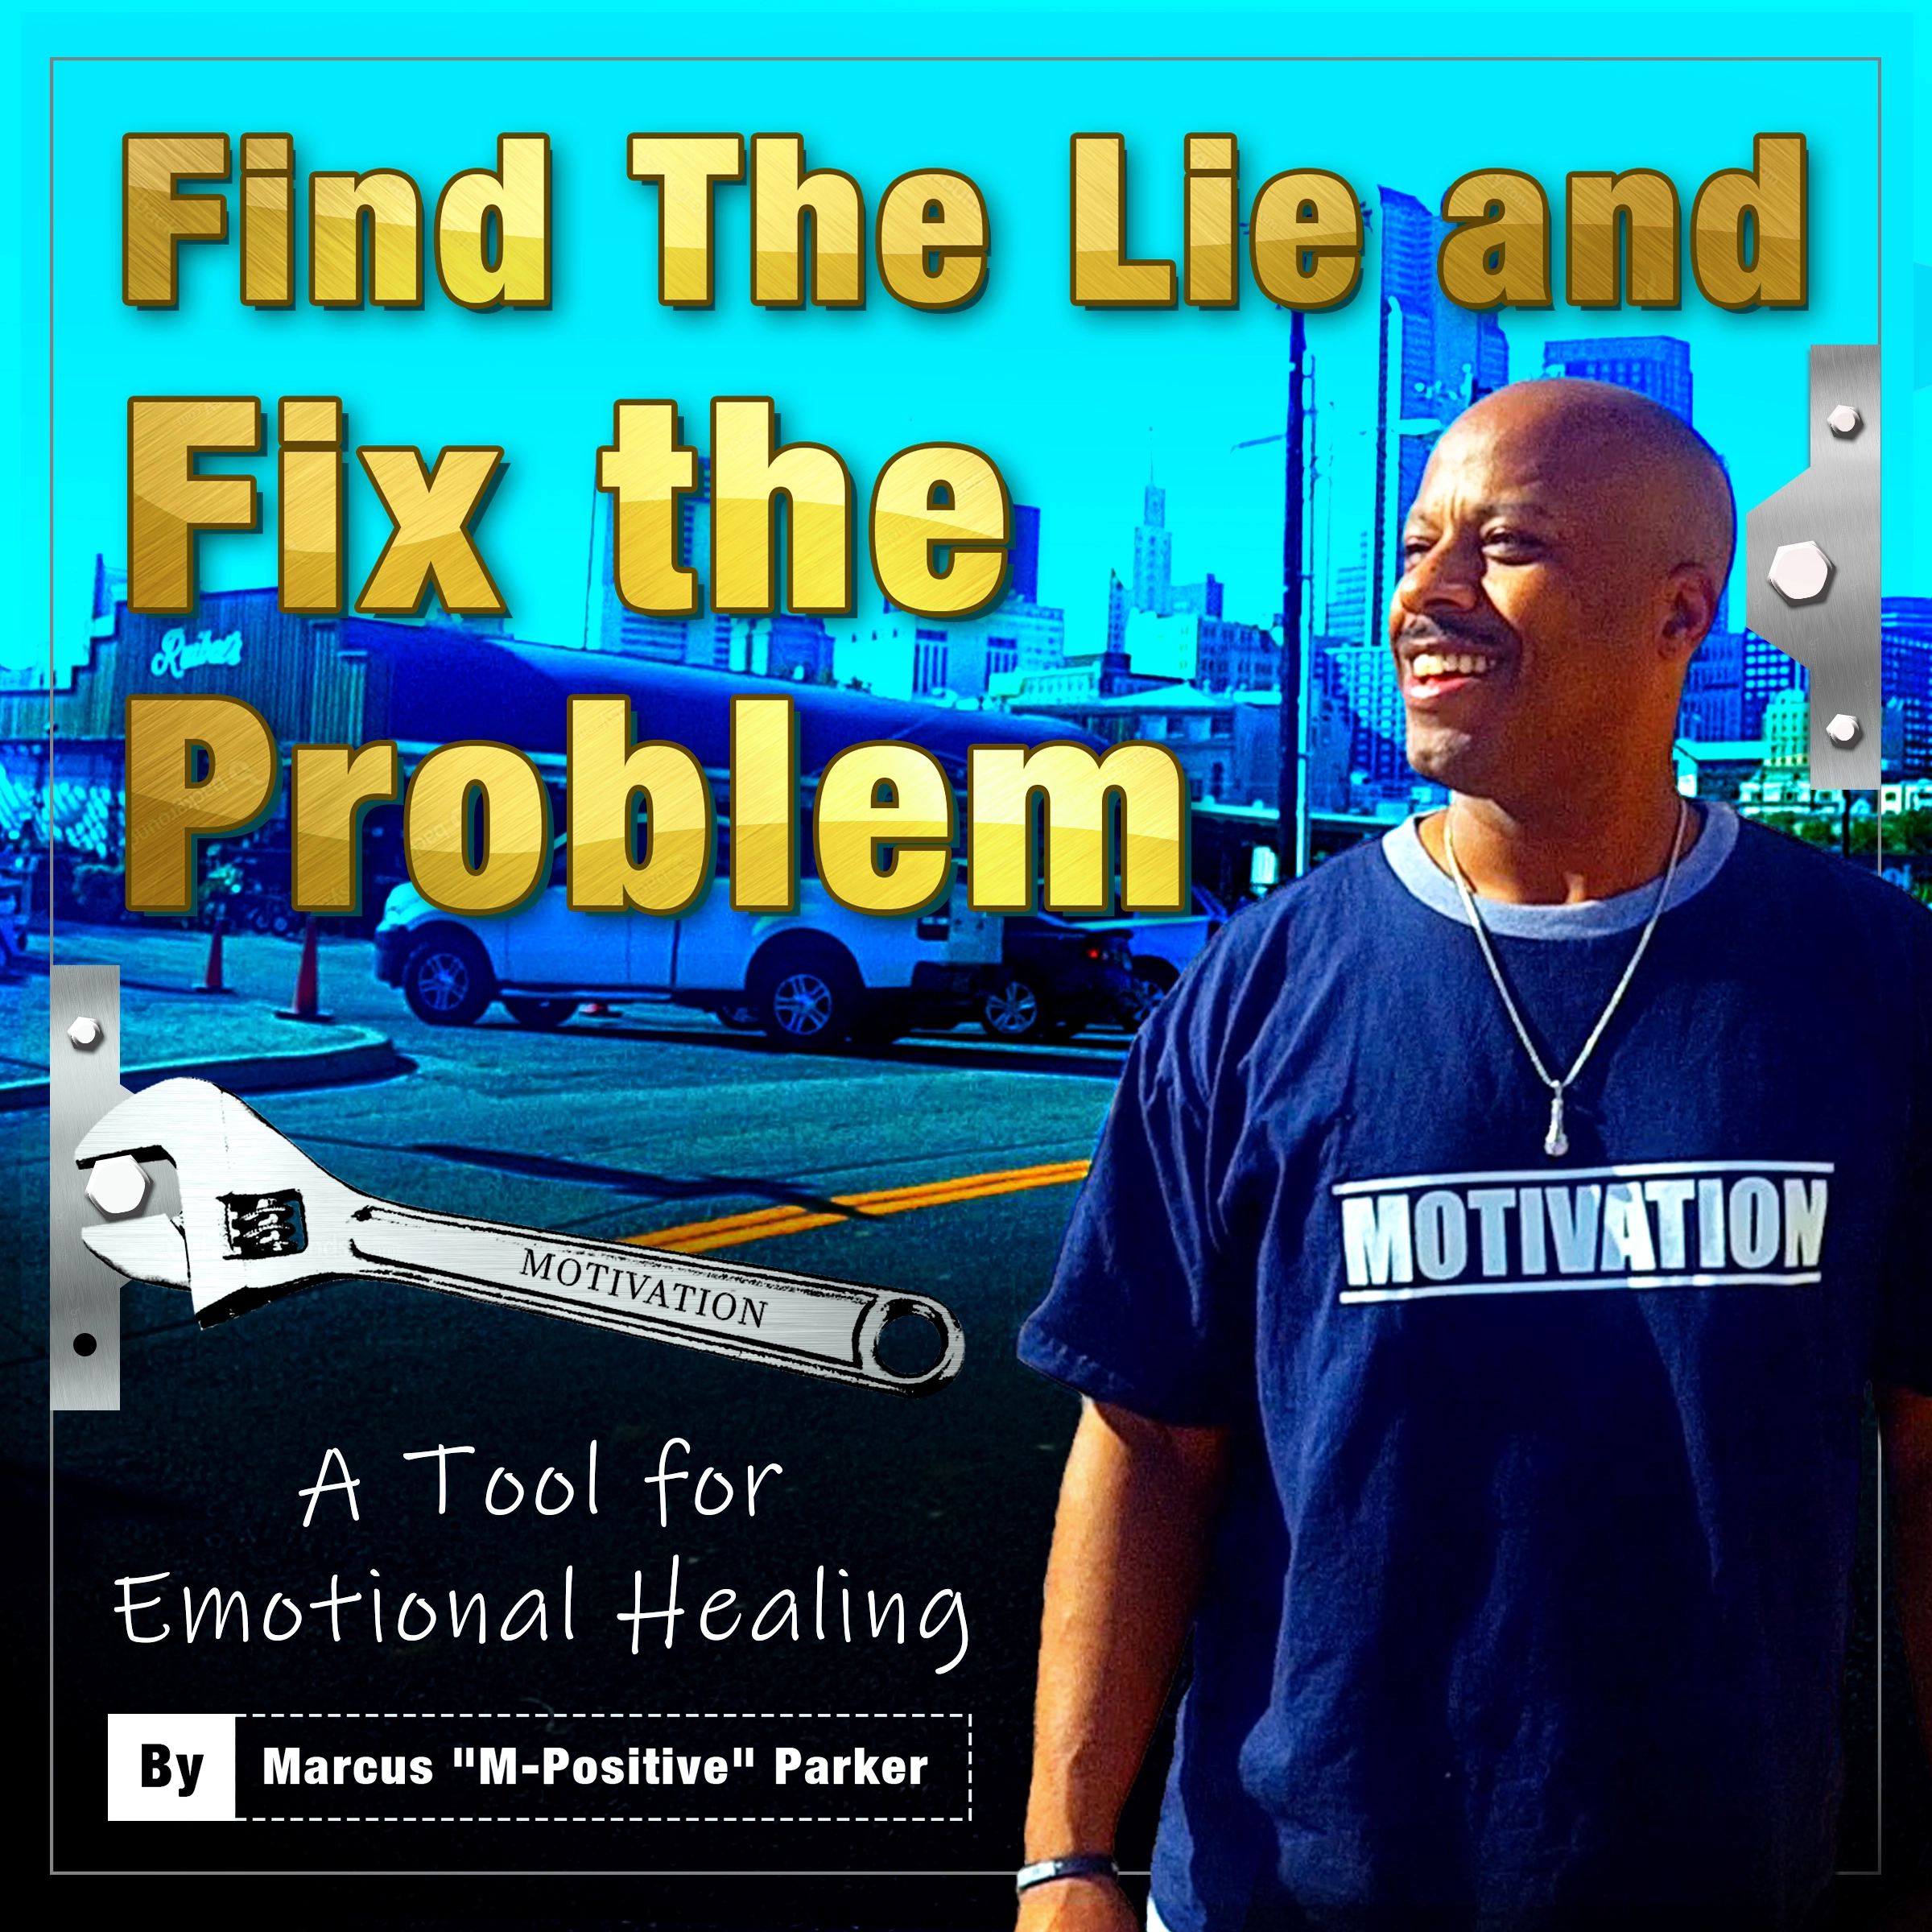 Find The Lie and Fix The Problem Audiobook by Marcus "M-Positive" Parker